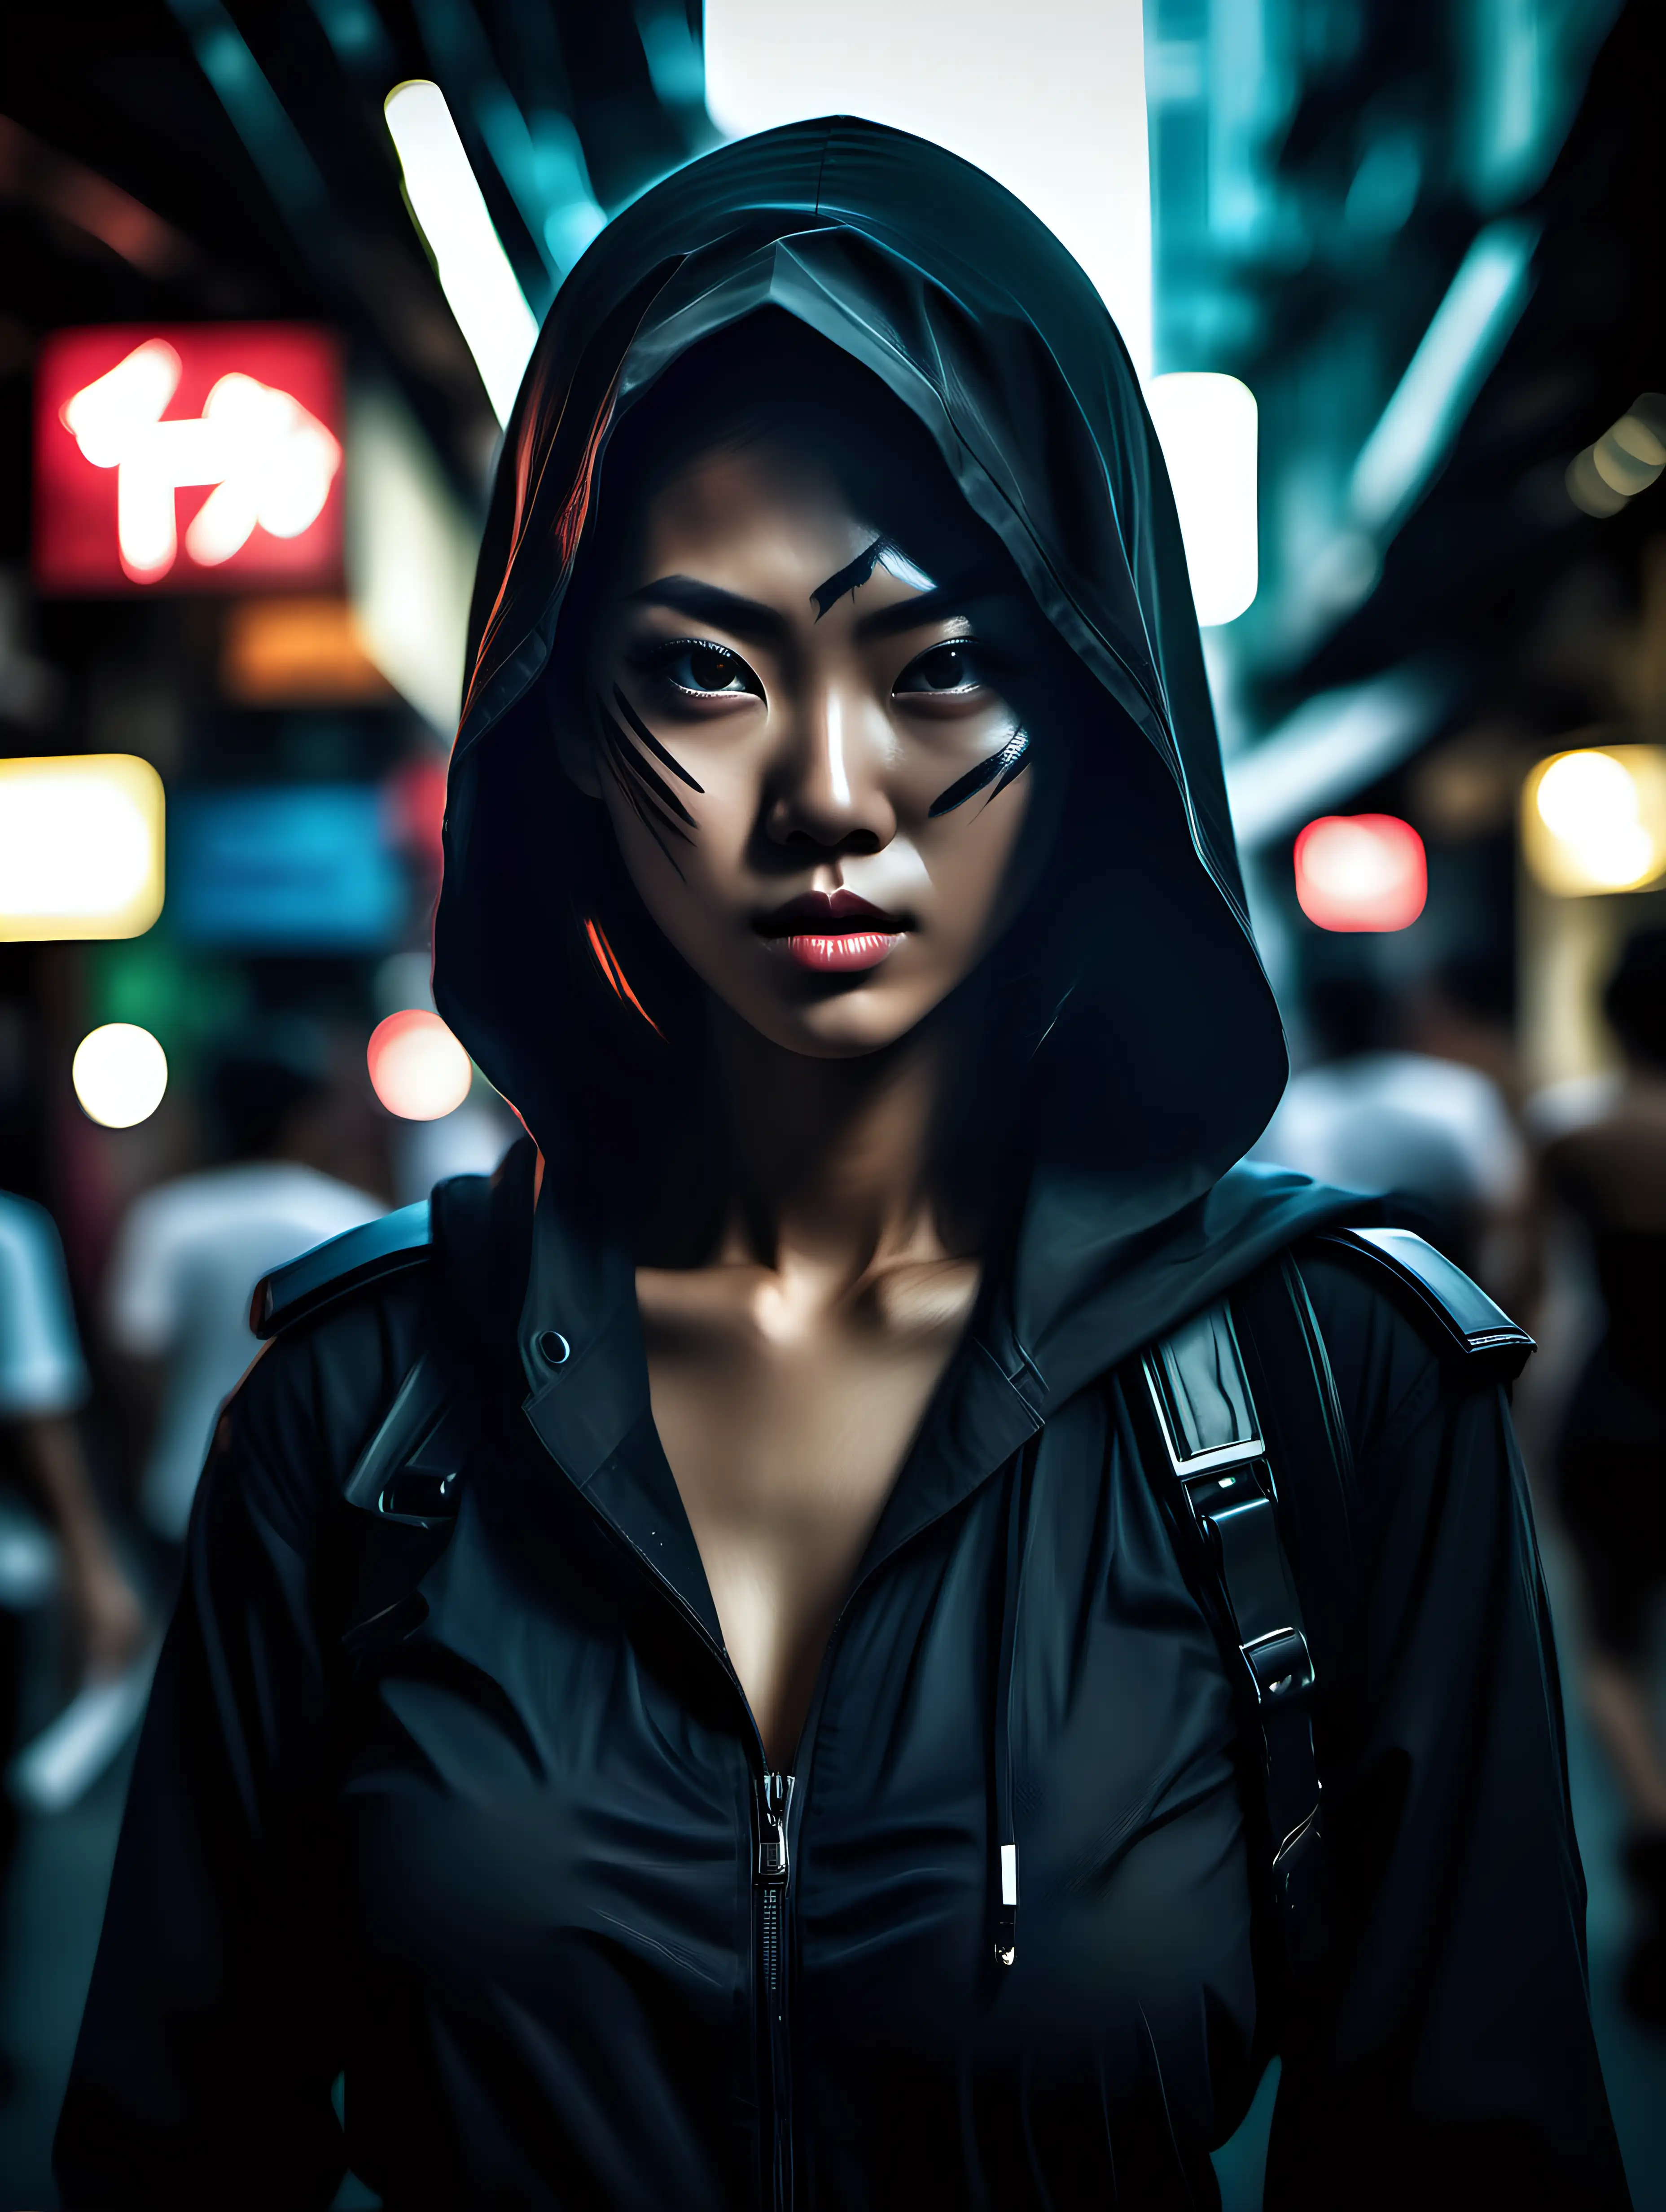 (cinematic lighting), a female assassin In the bustling streets of modern Bangkok, she is a paradox of youth and lethal expertise. With an air of quiet confidence, she navigates the vibrant cityscape with a mix of inconspicuous elegance and razor-sharp focus. Cloaked in urban chic attire that conceals the arsenal beneath, her eyes reveal a wisdom beyond her years. Her movements are a seamless blend of calculated precision and the spontaneity of the metropolis. In the chaos of Bangkok's nightlife, she is both a chameleon and a predator, embodying the juxtaposition of youthfulness and the shadows of a covert profession. Intricate details, detailed face, detailed eyes, hyper realistic photography,